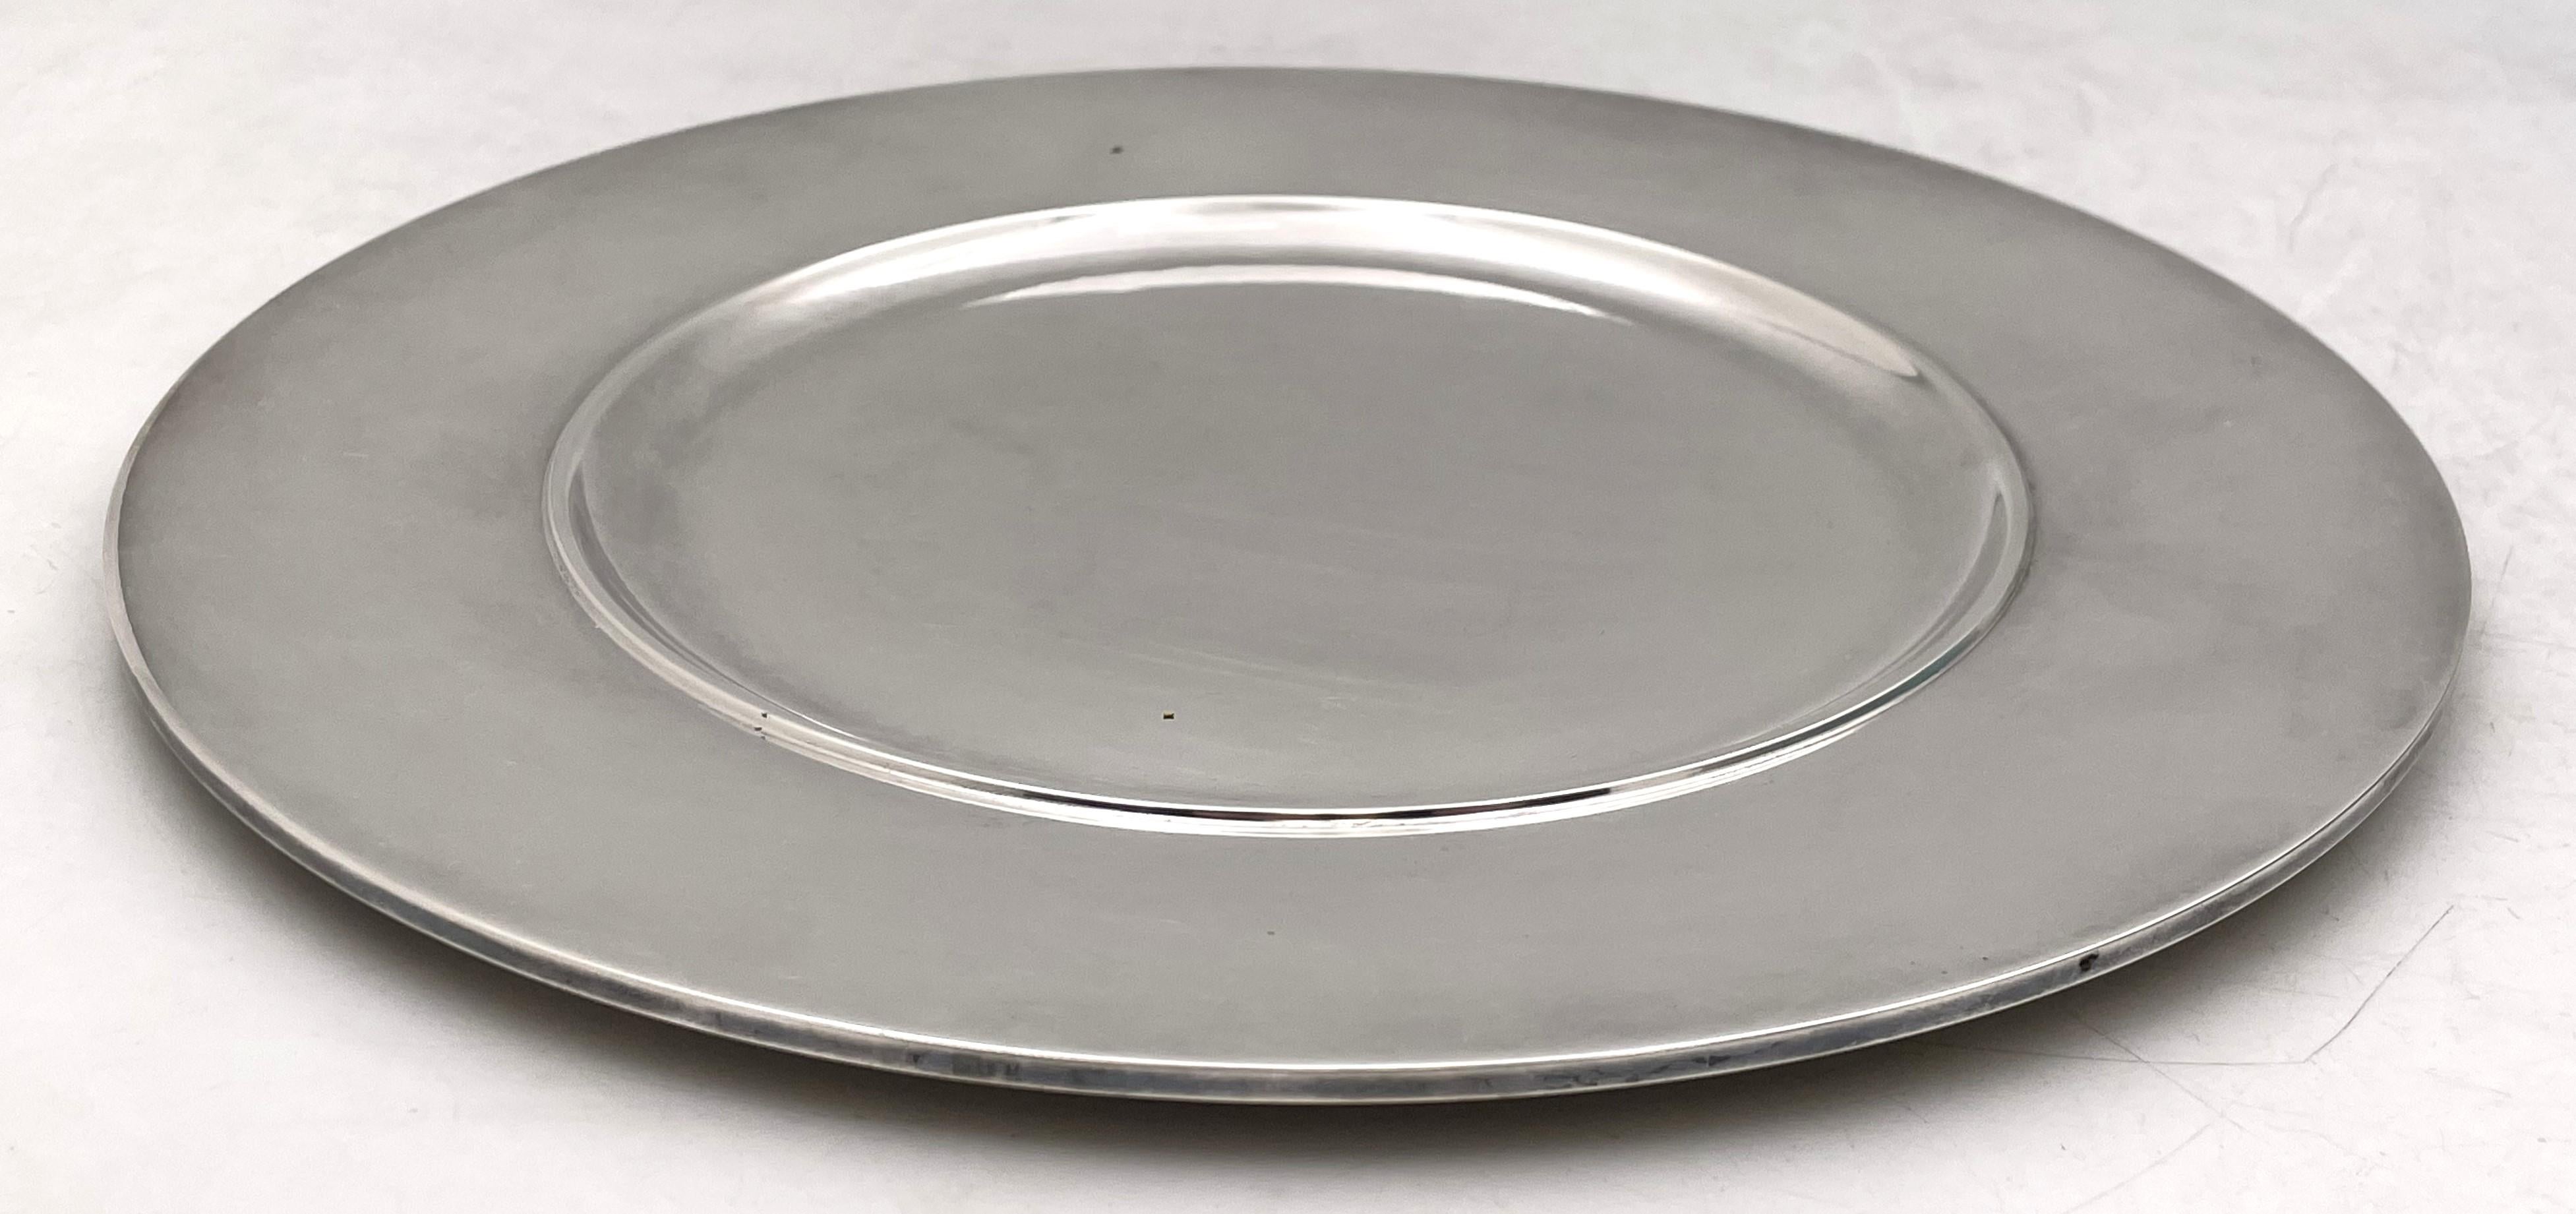 Danish Georg Jensen by J. Rohde Sterling Silver Plate/ Charger #587C Art Deco 1930s